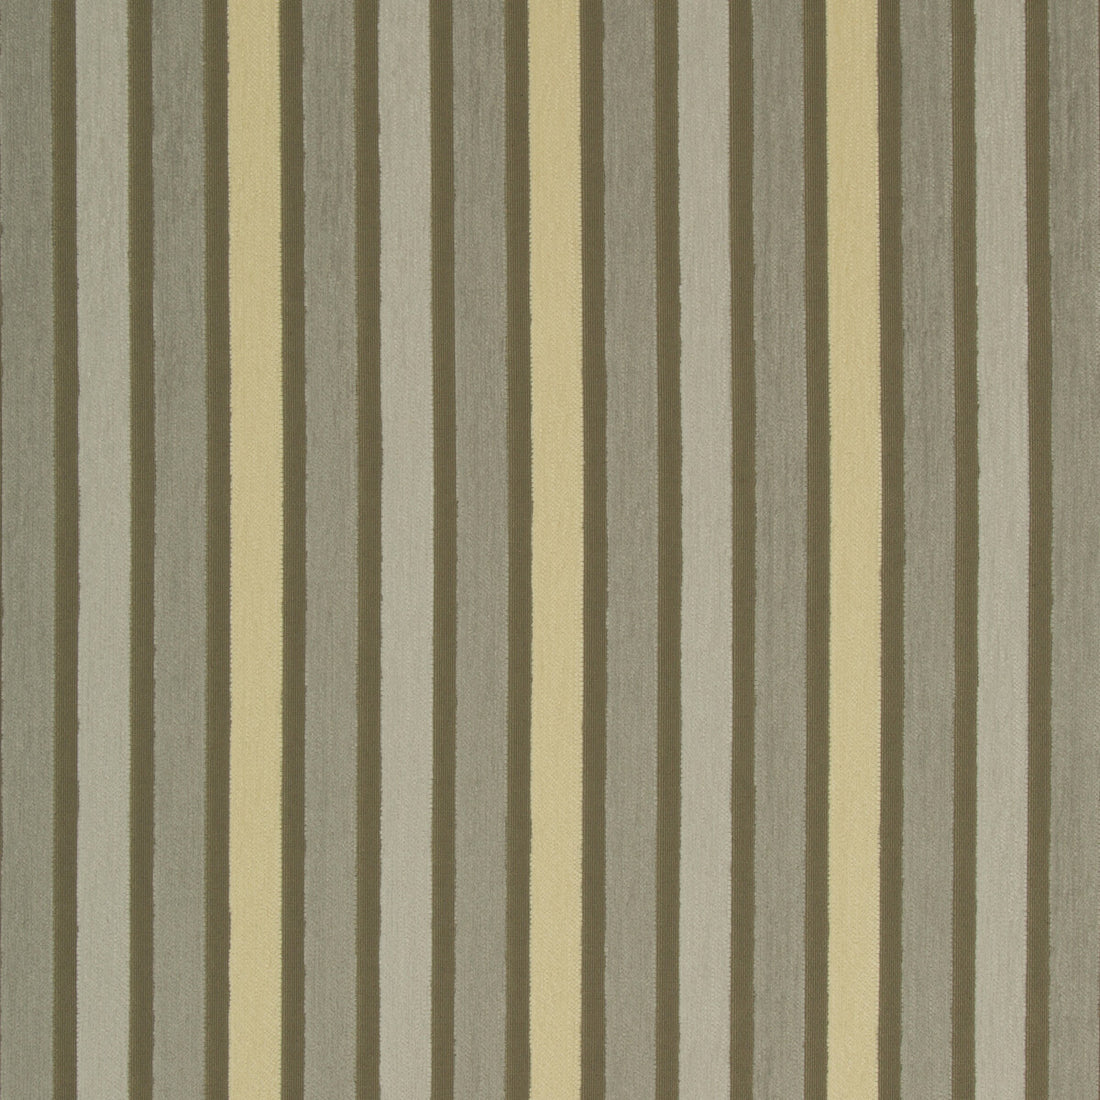 Guru fabric in vanilla bean color - pattern 35083.1611.0 - by Kravet Contract in the Gis Crypton collection